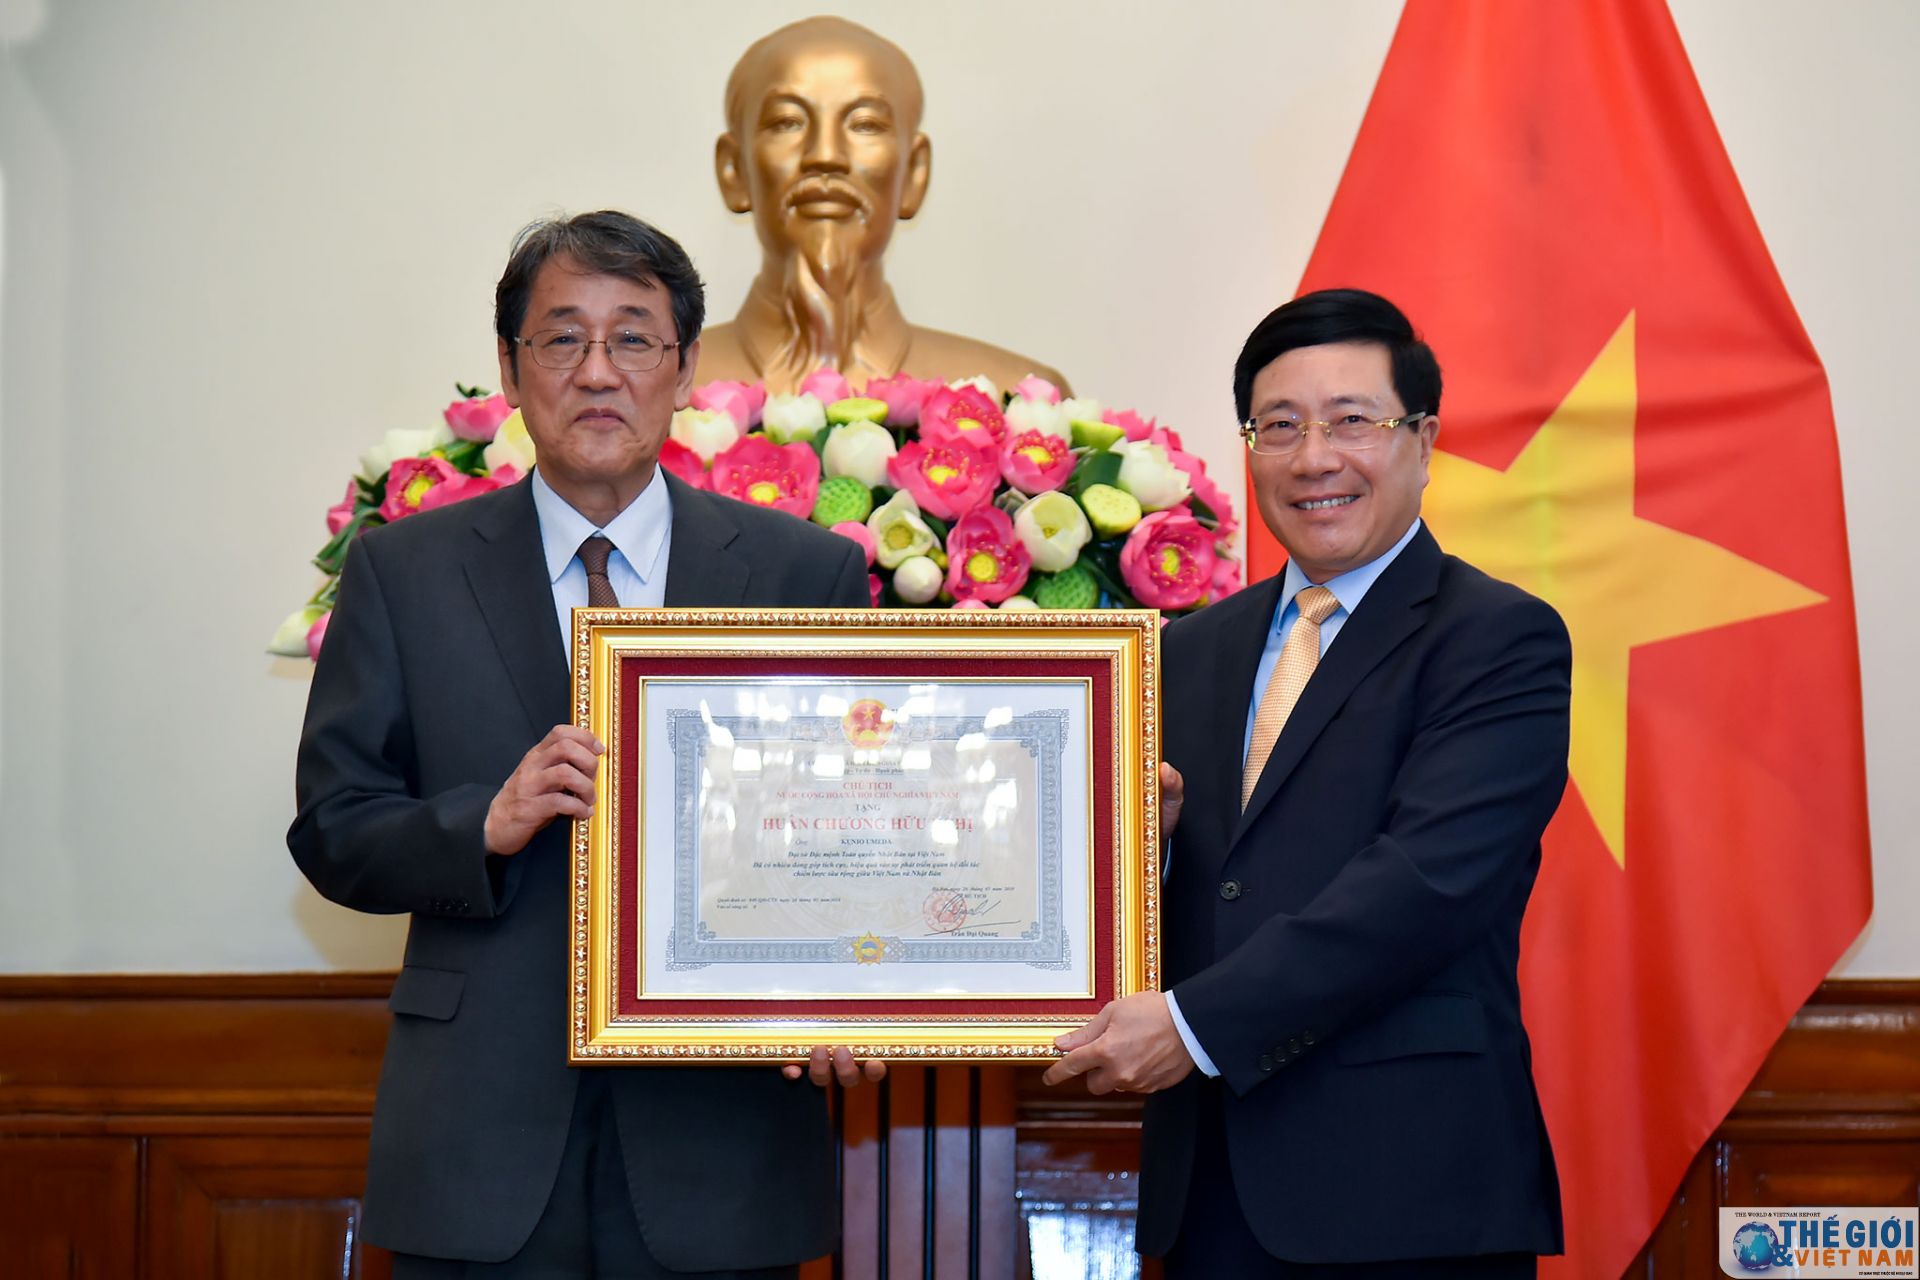 foreign minister pham binh minh presented friendship order to japanese outgoing ambassador